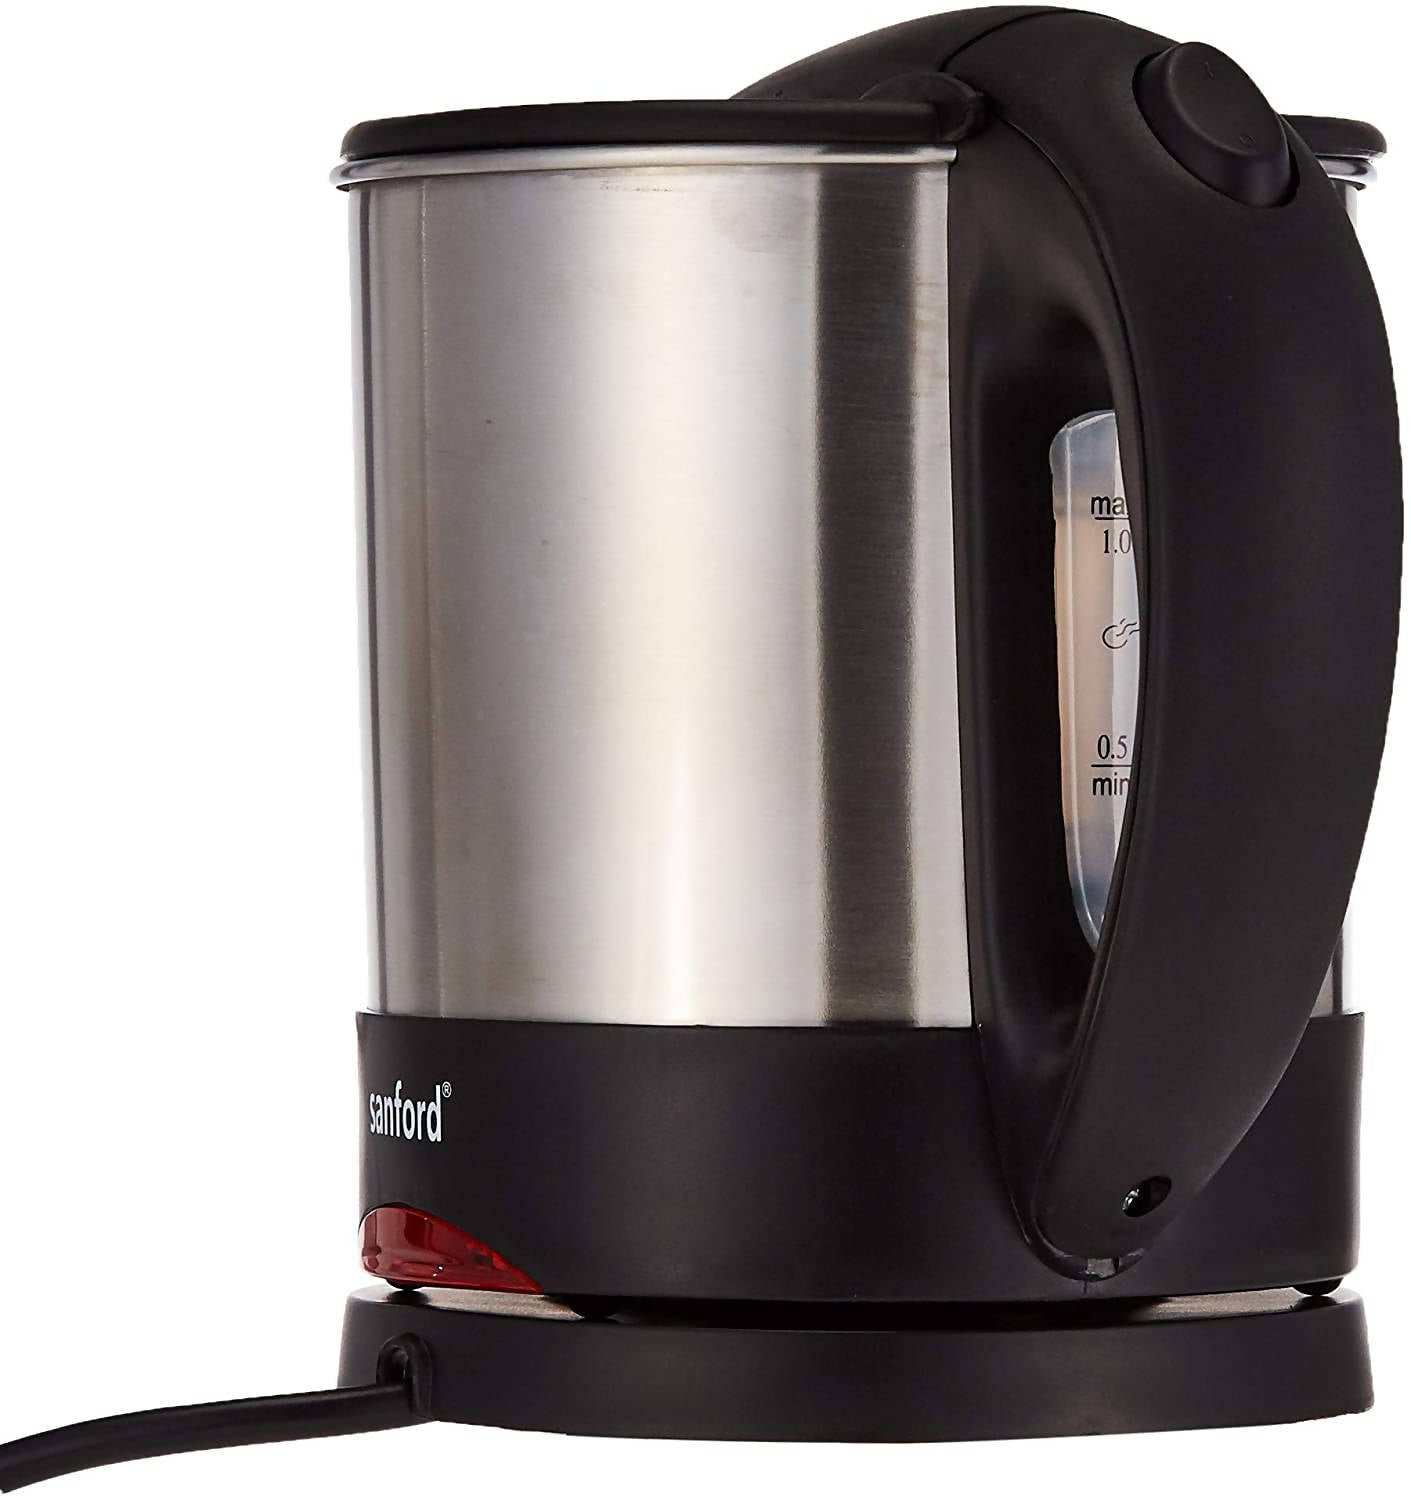 Sanford Stainless Steel Electric Kettle Black & Silver